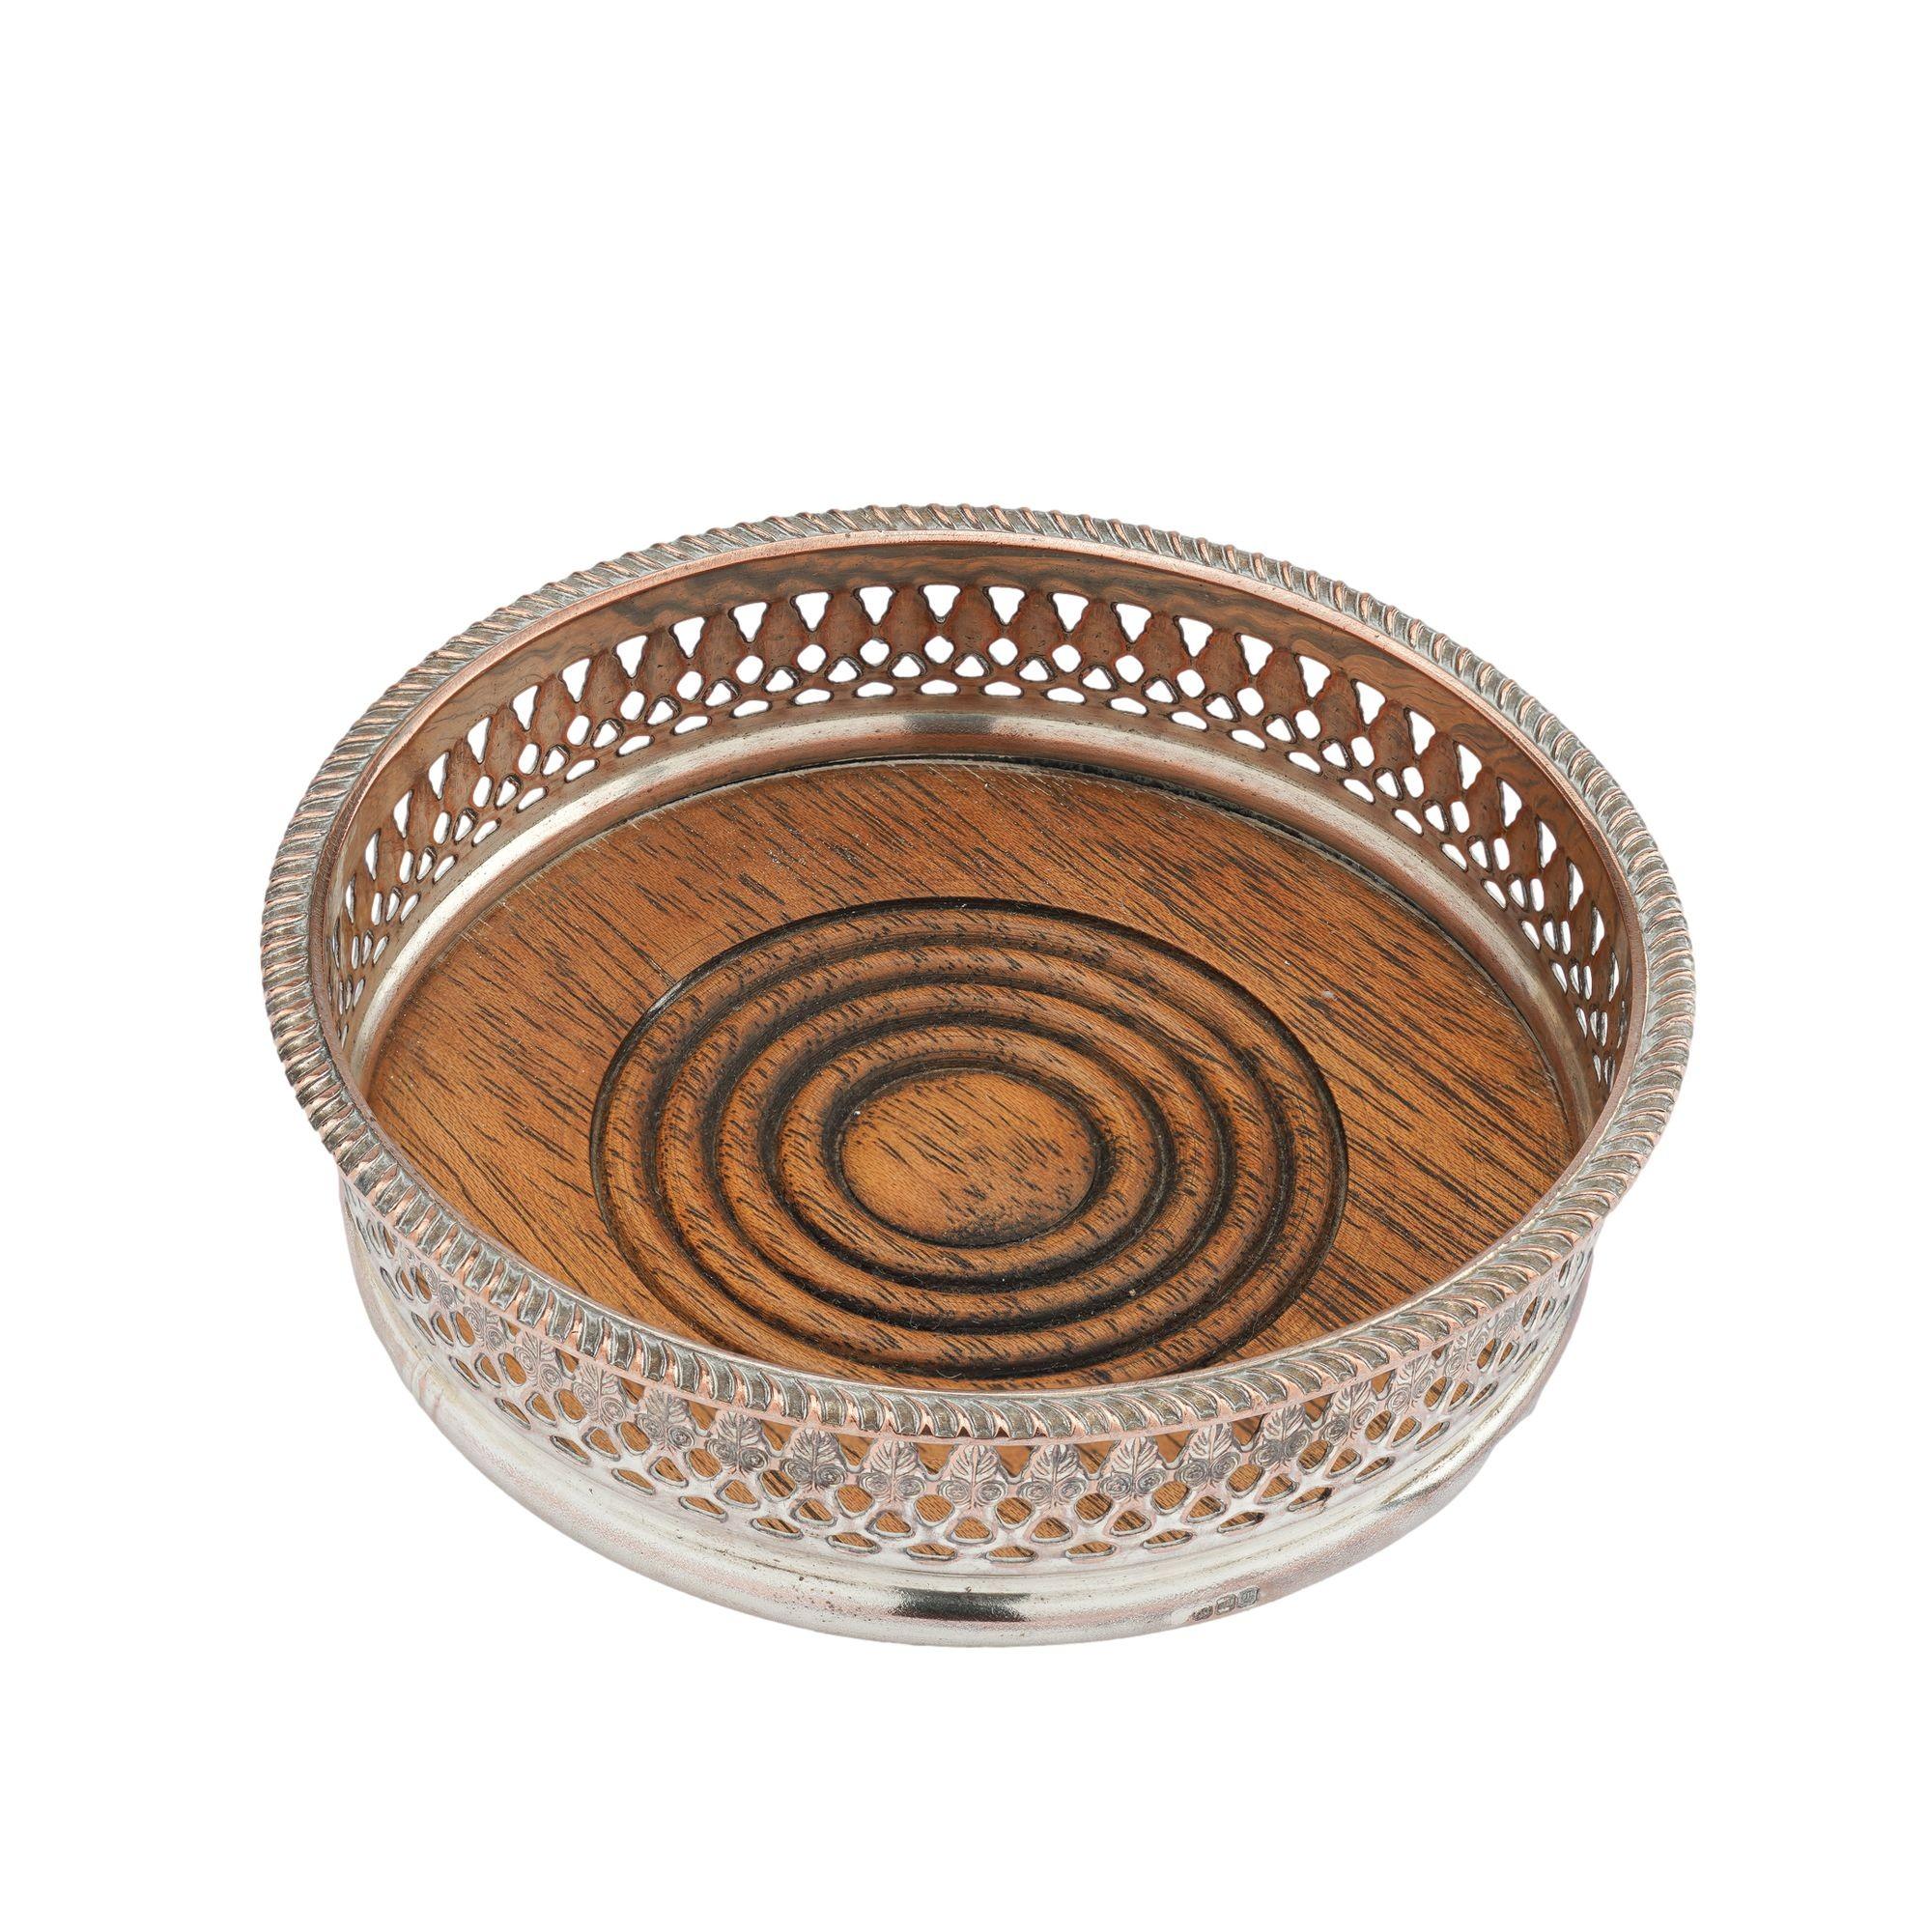 Sterling silver plated copper Sheffield decanter coaster. The coaster is stamped with a Neoclassic anthemion decoration on the pierced gallery below a gadroon molding. A turned wood base is fitted to the bottom of the coaster. A set of three